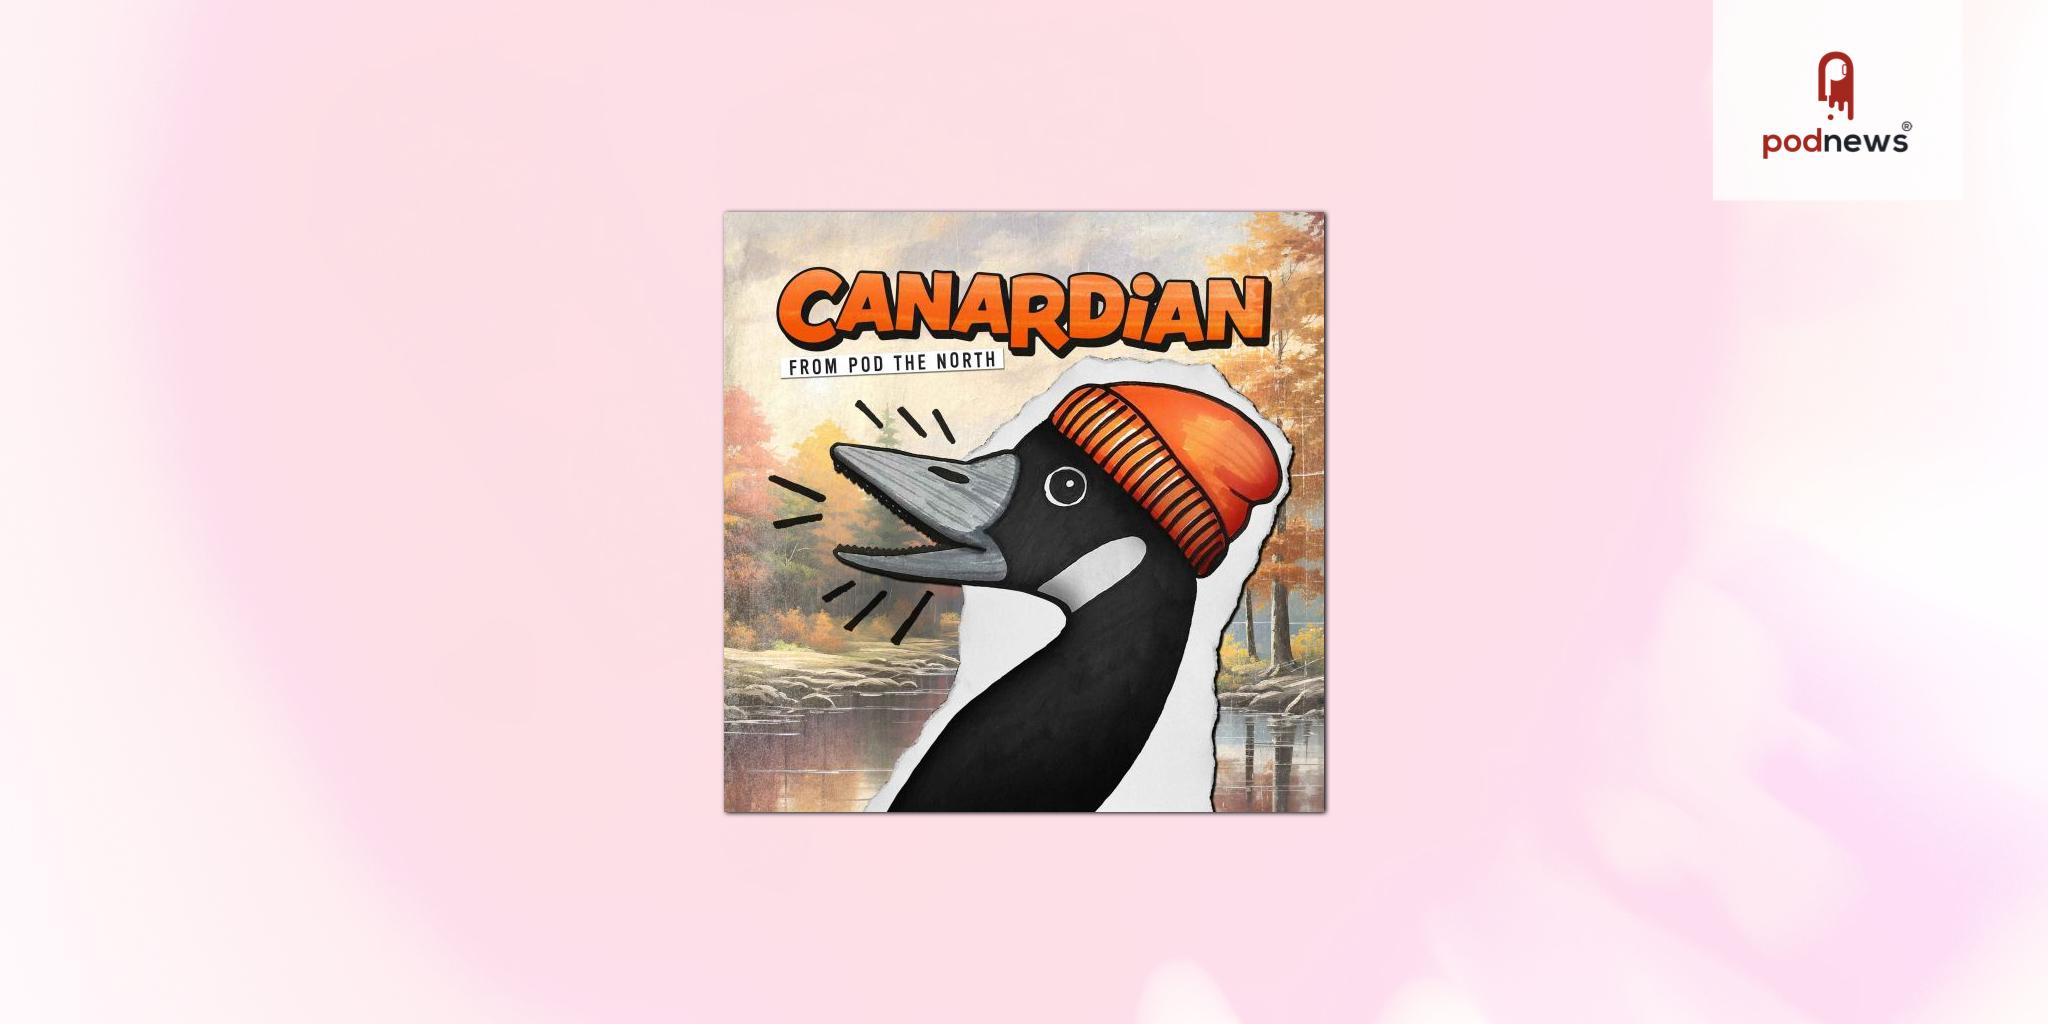 Pod the North launches “Canardian”, a podcast gossiping about the hometowns of notable Canadian podcasters